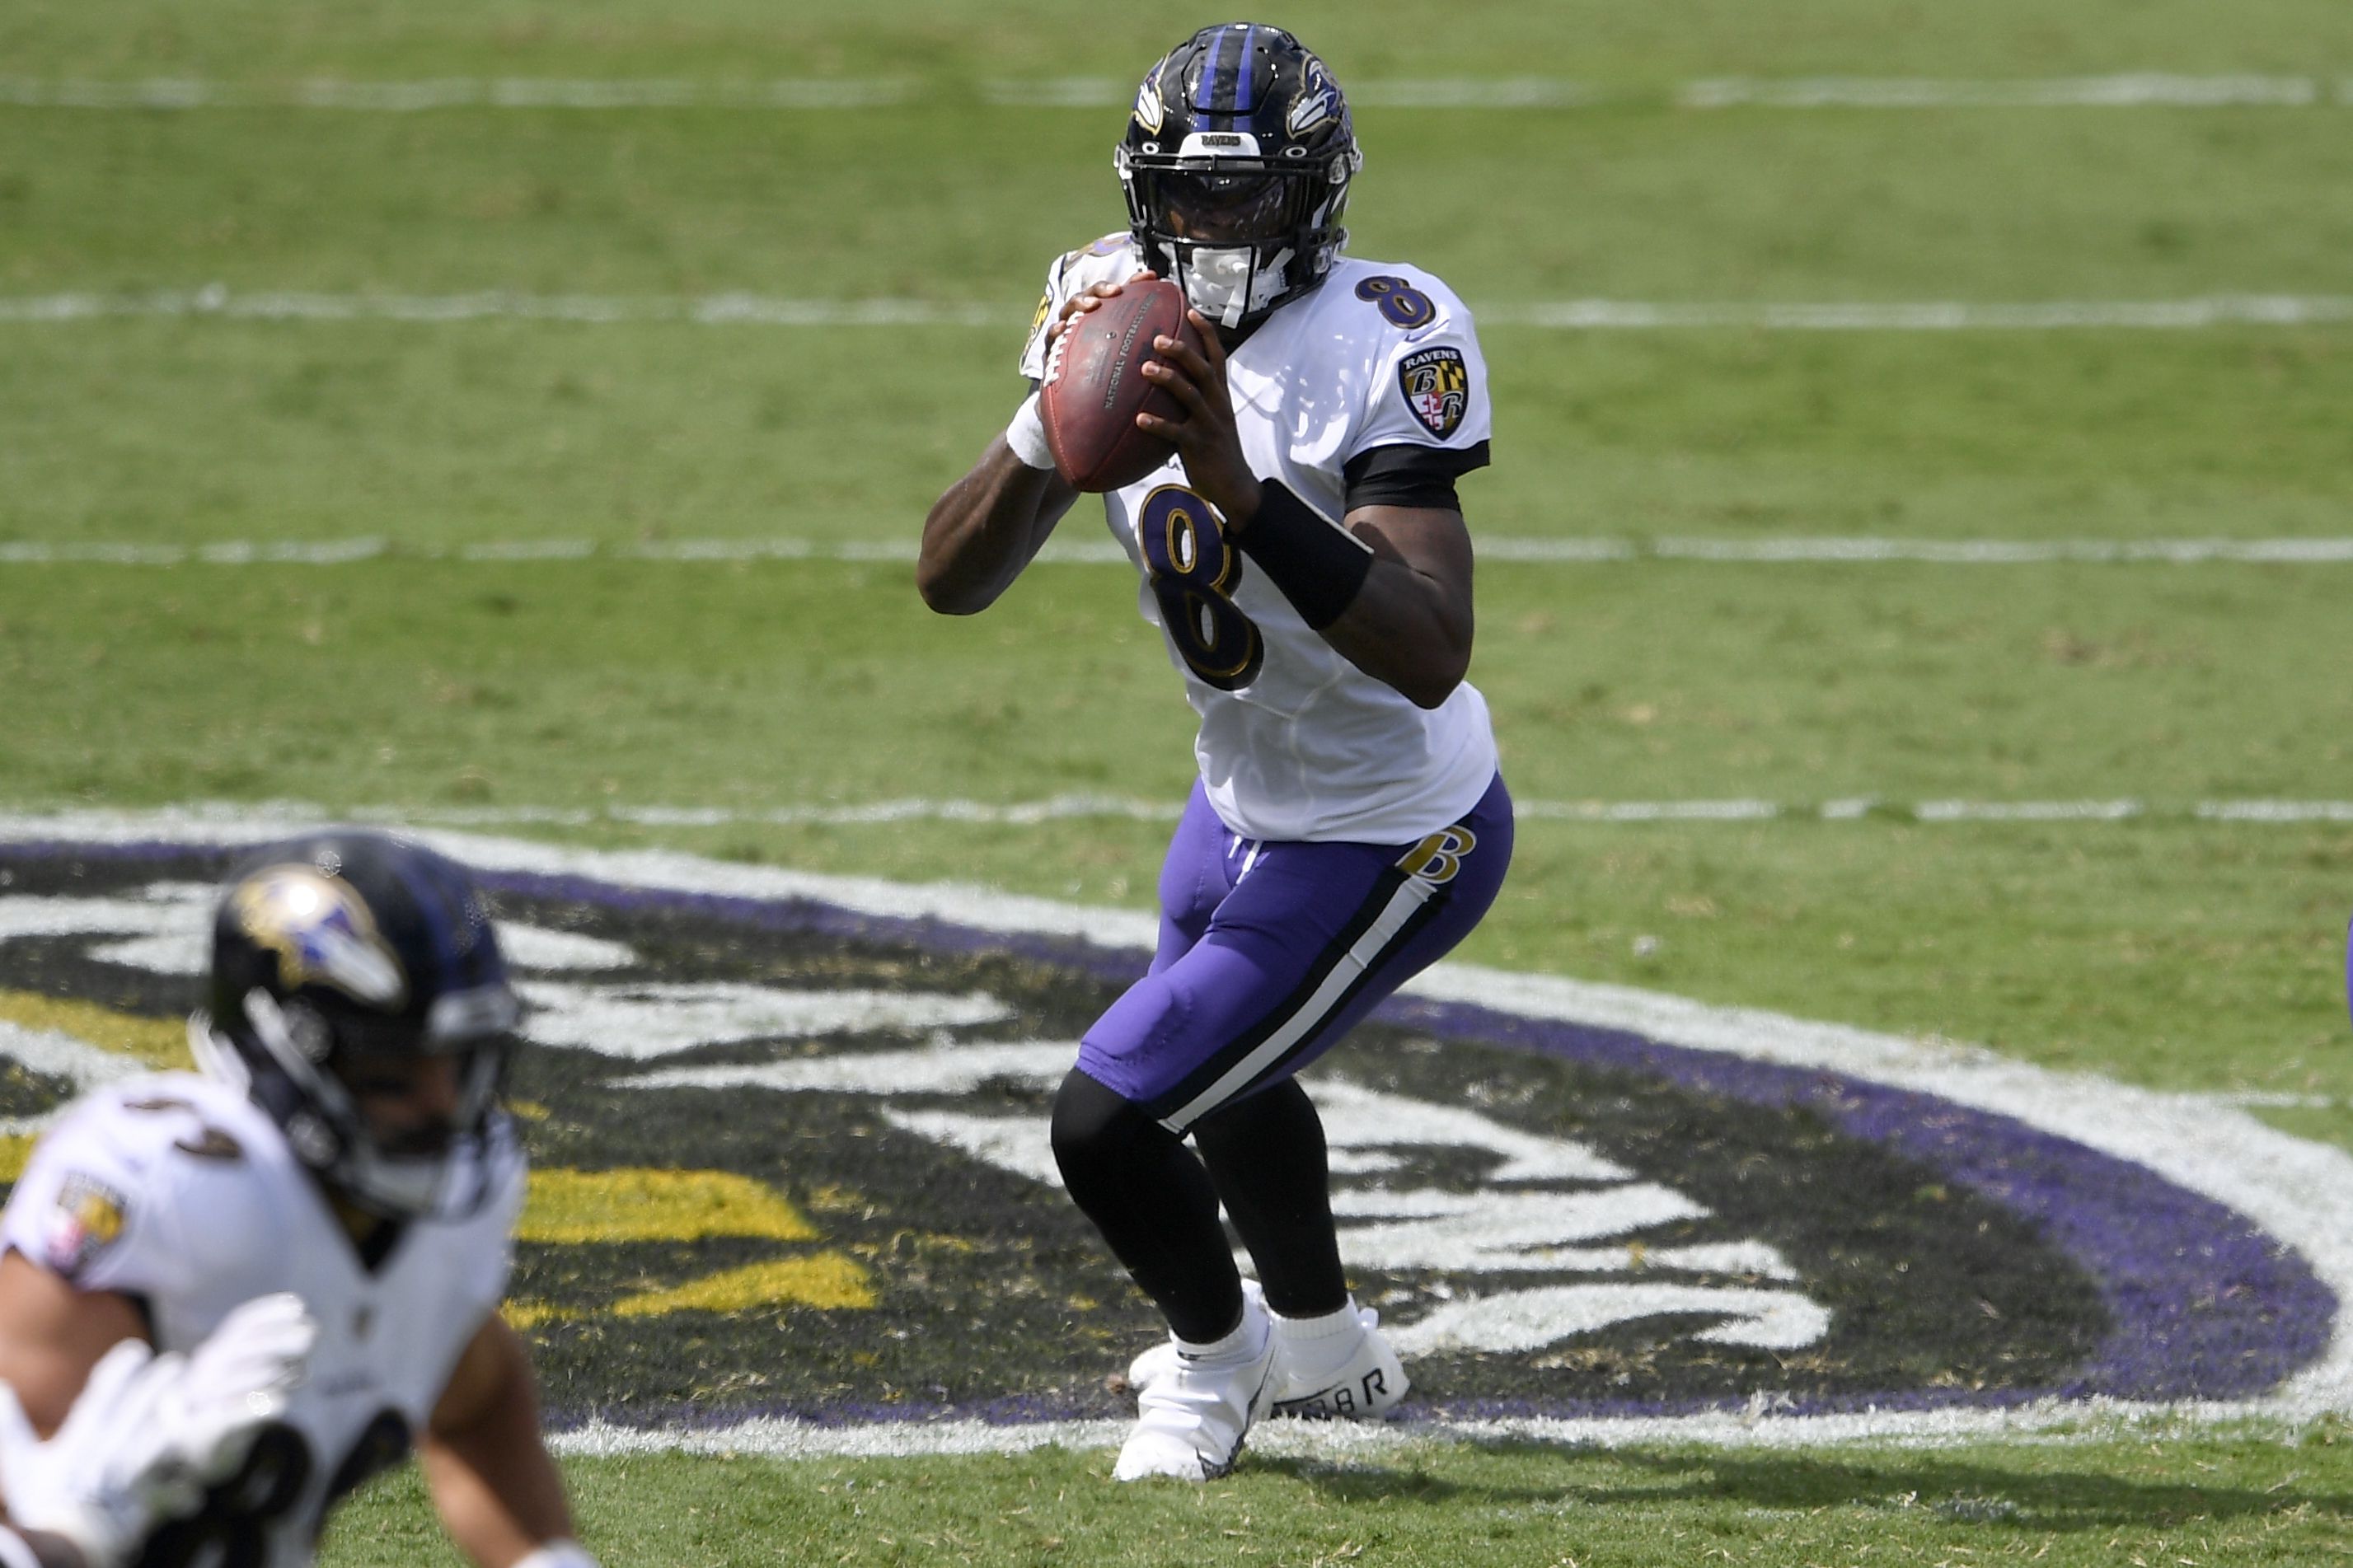 Ravens vs. Texans Live Streaming Scoreboard, Free Play-By-Play